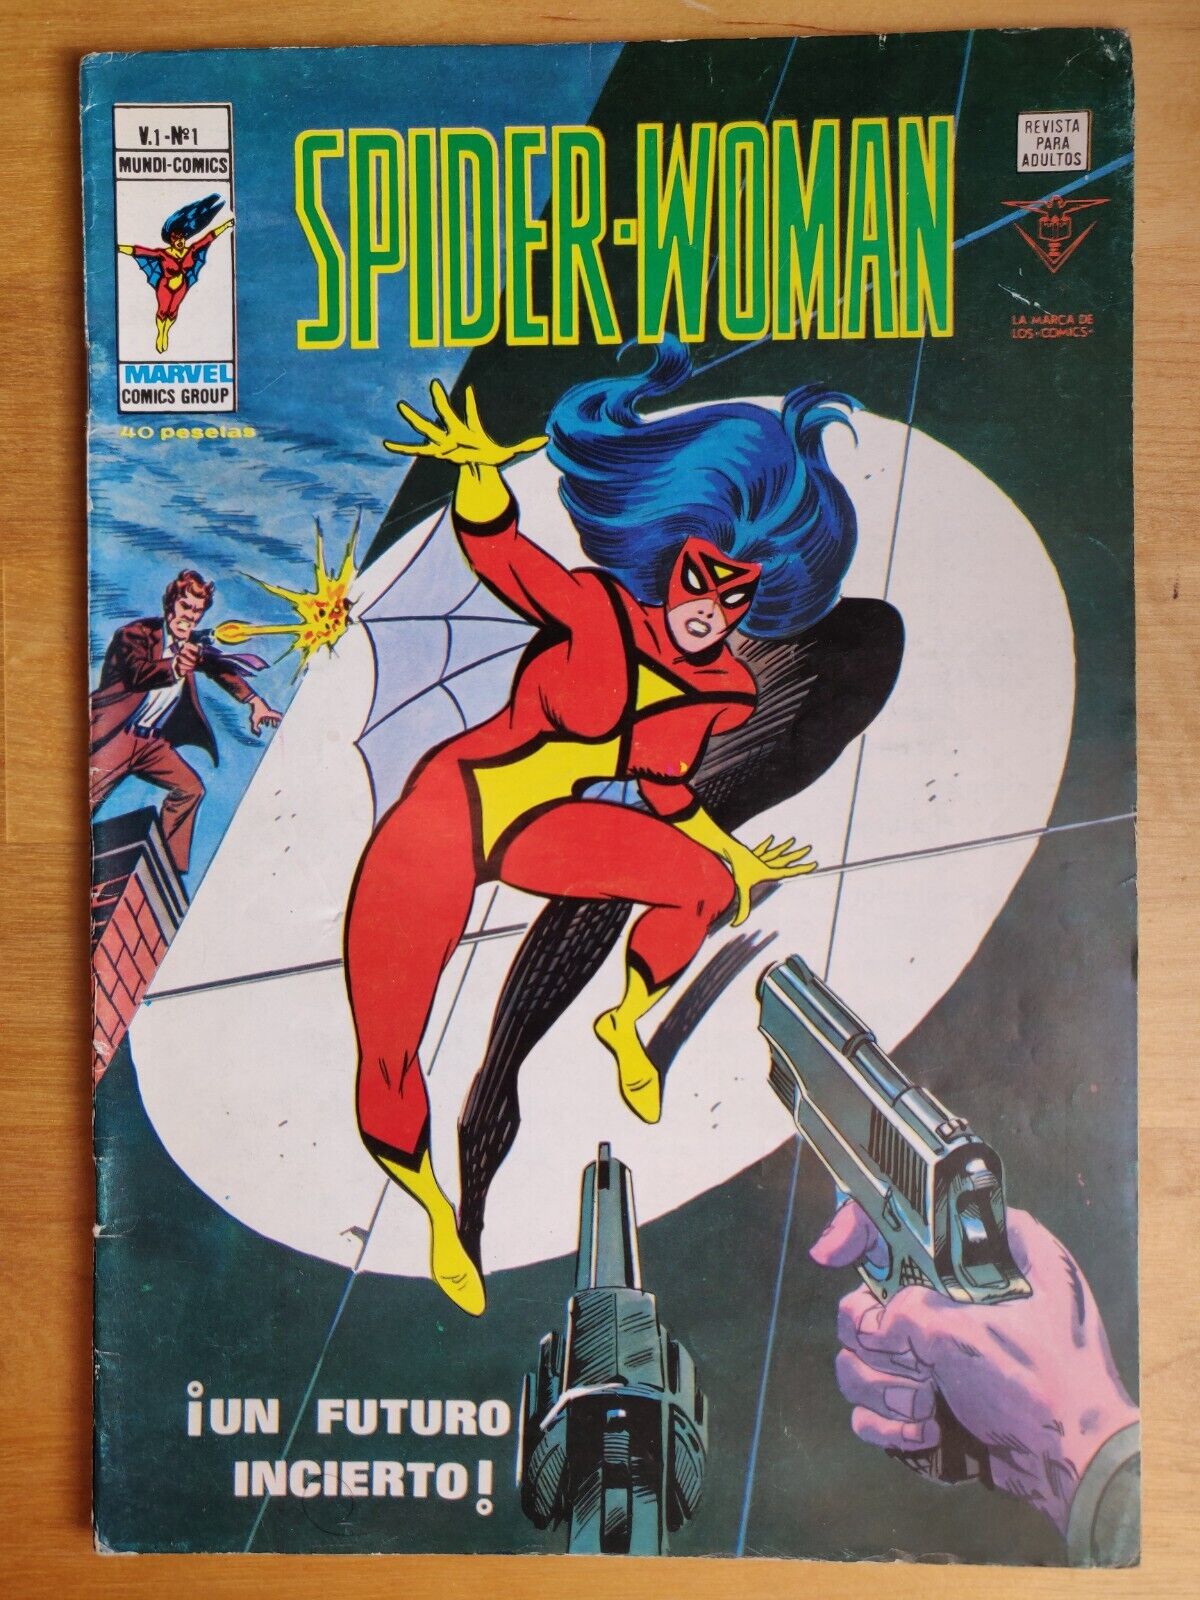 SPIDER-WOMAN #1 - RARE Spanish Foreign - Variant REDRAWN cover New Origin